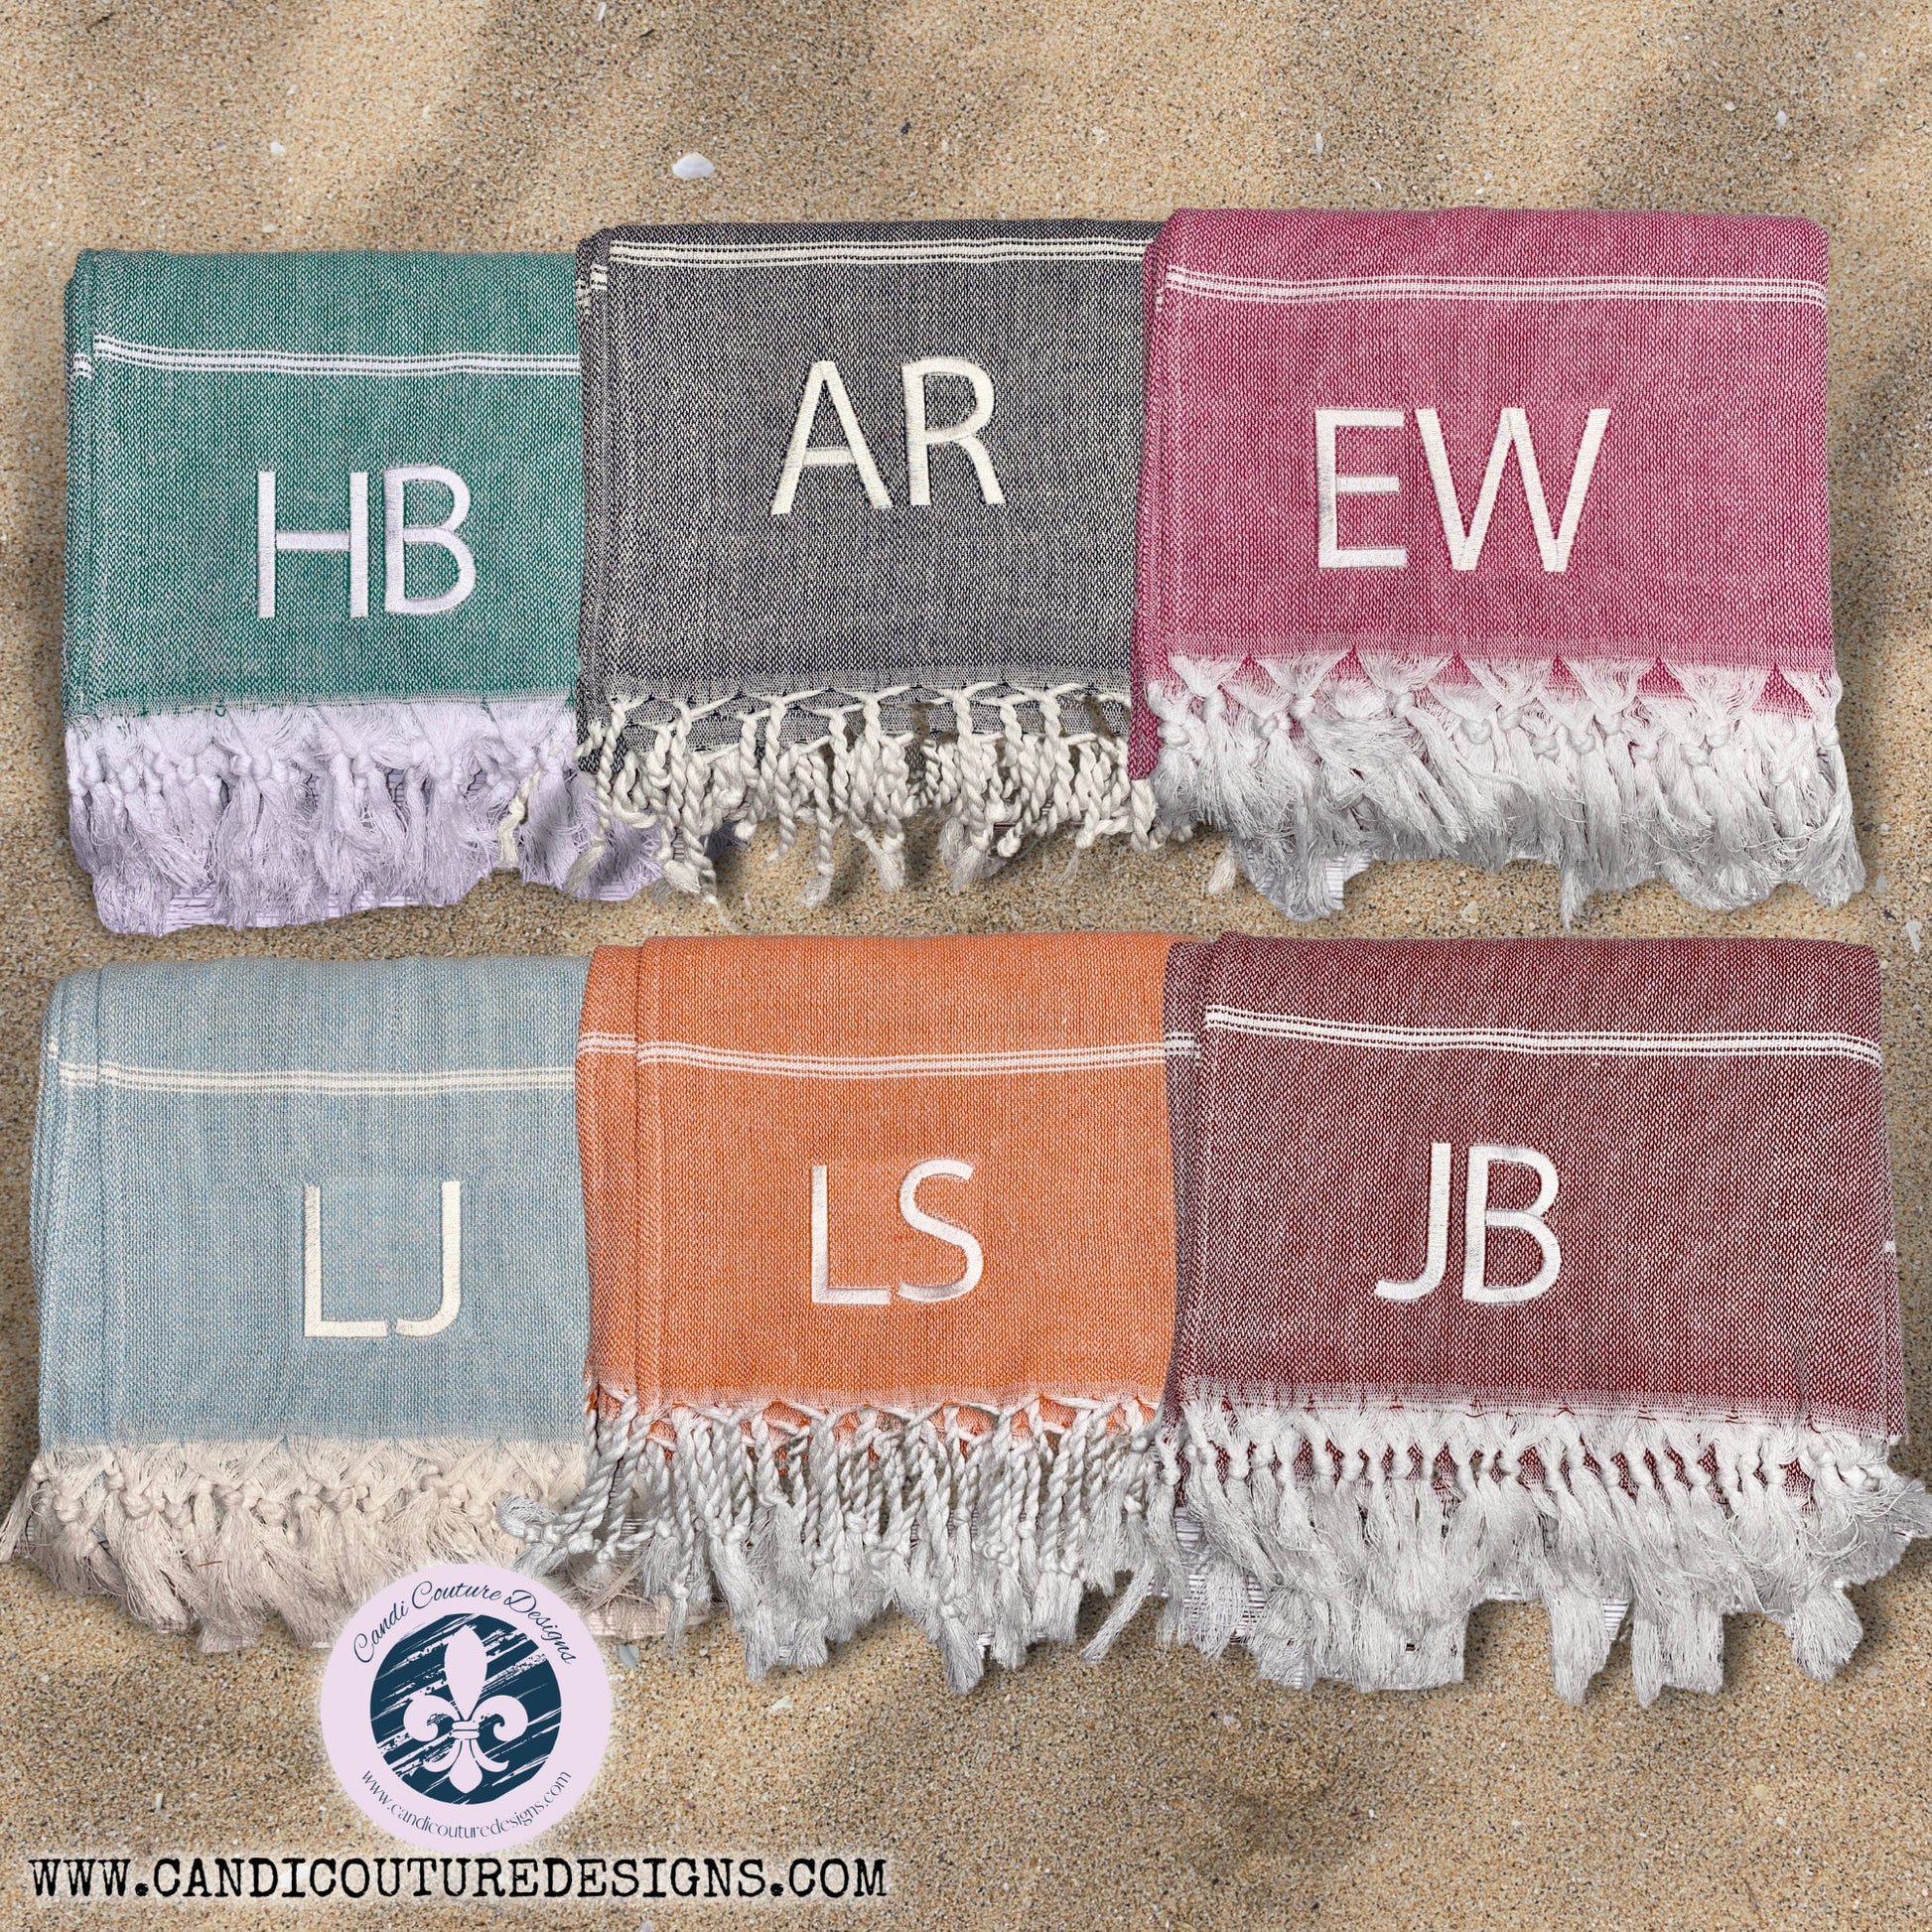 Personalized Turkish Beach Towels, Monogrammed Beach Towels, Embroidered Turkish Towels, Pool Towel, Travel, Summer, Bath, Swimming Gift